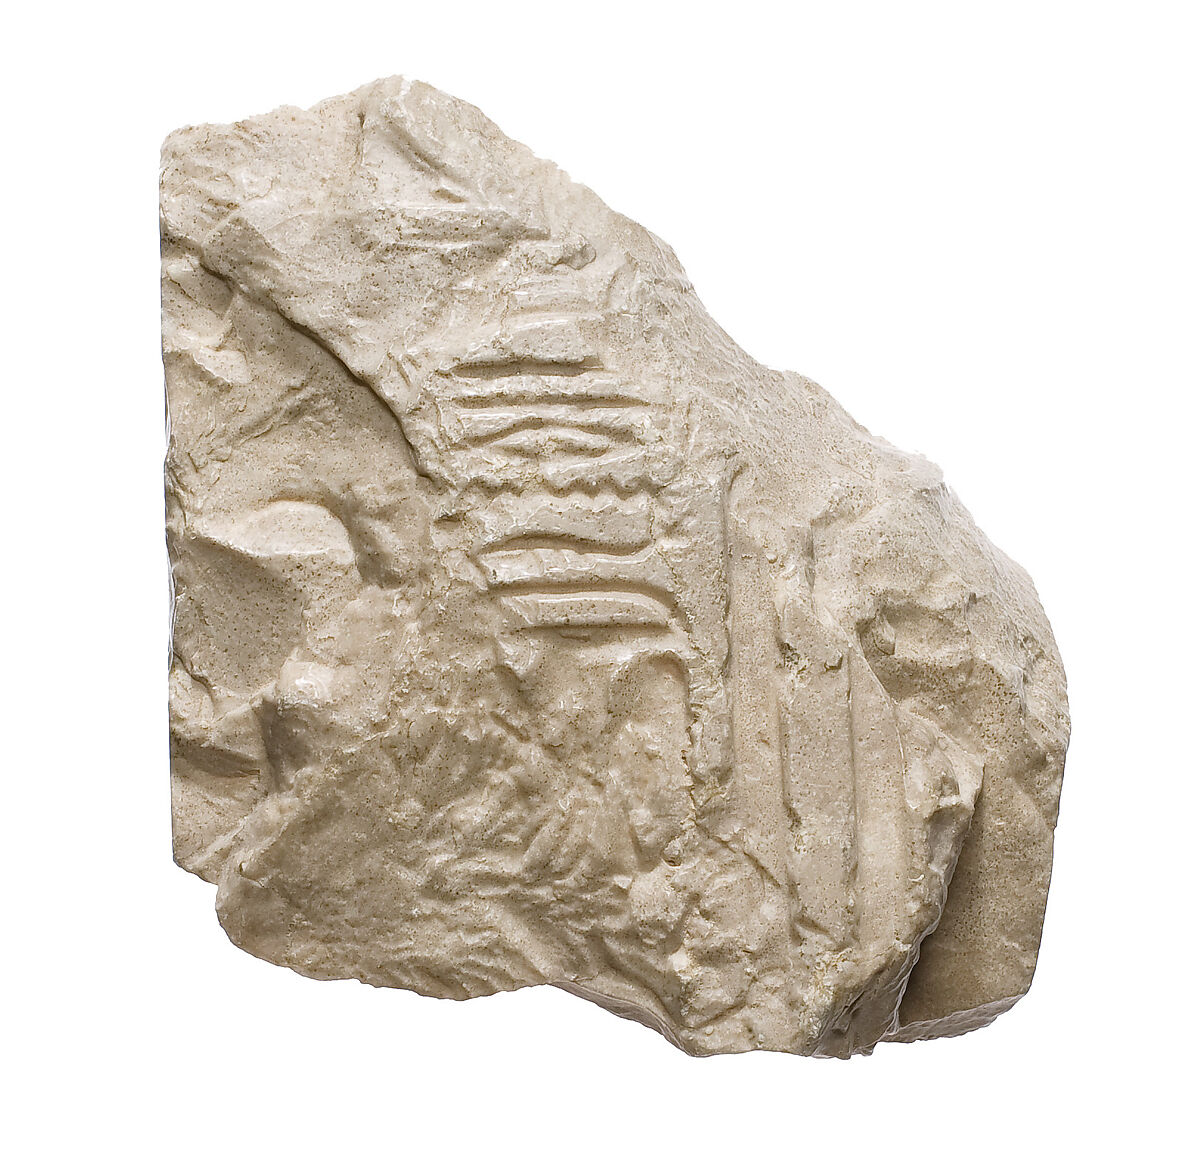 Inscribed fragment, Aten cartouche, Indurated limestone 